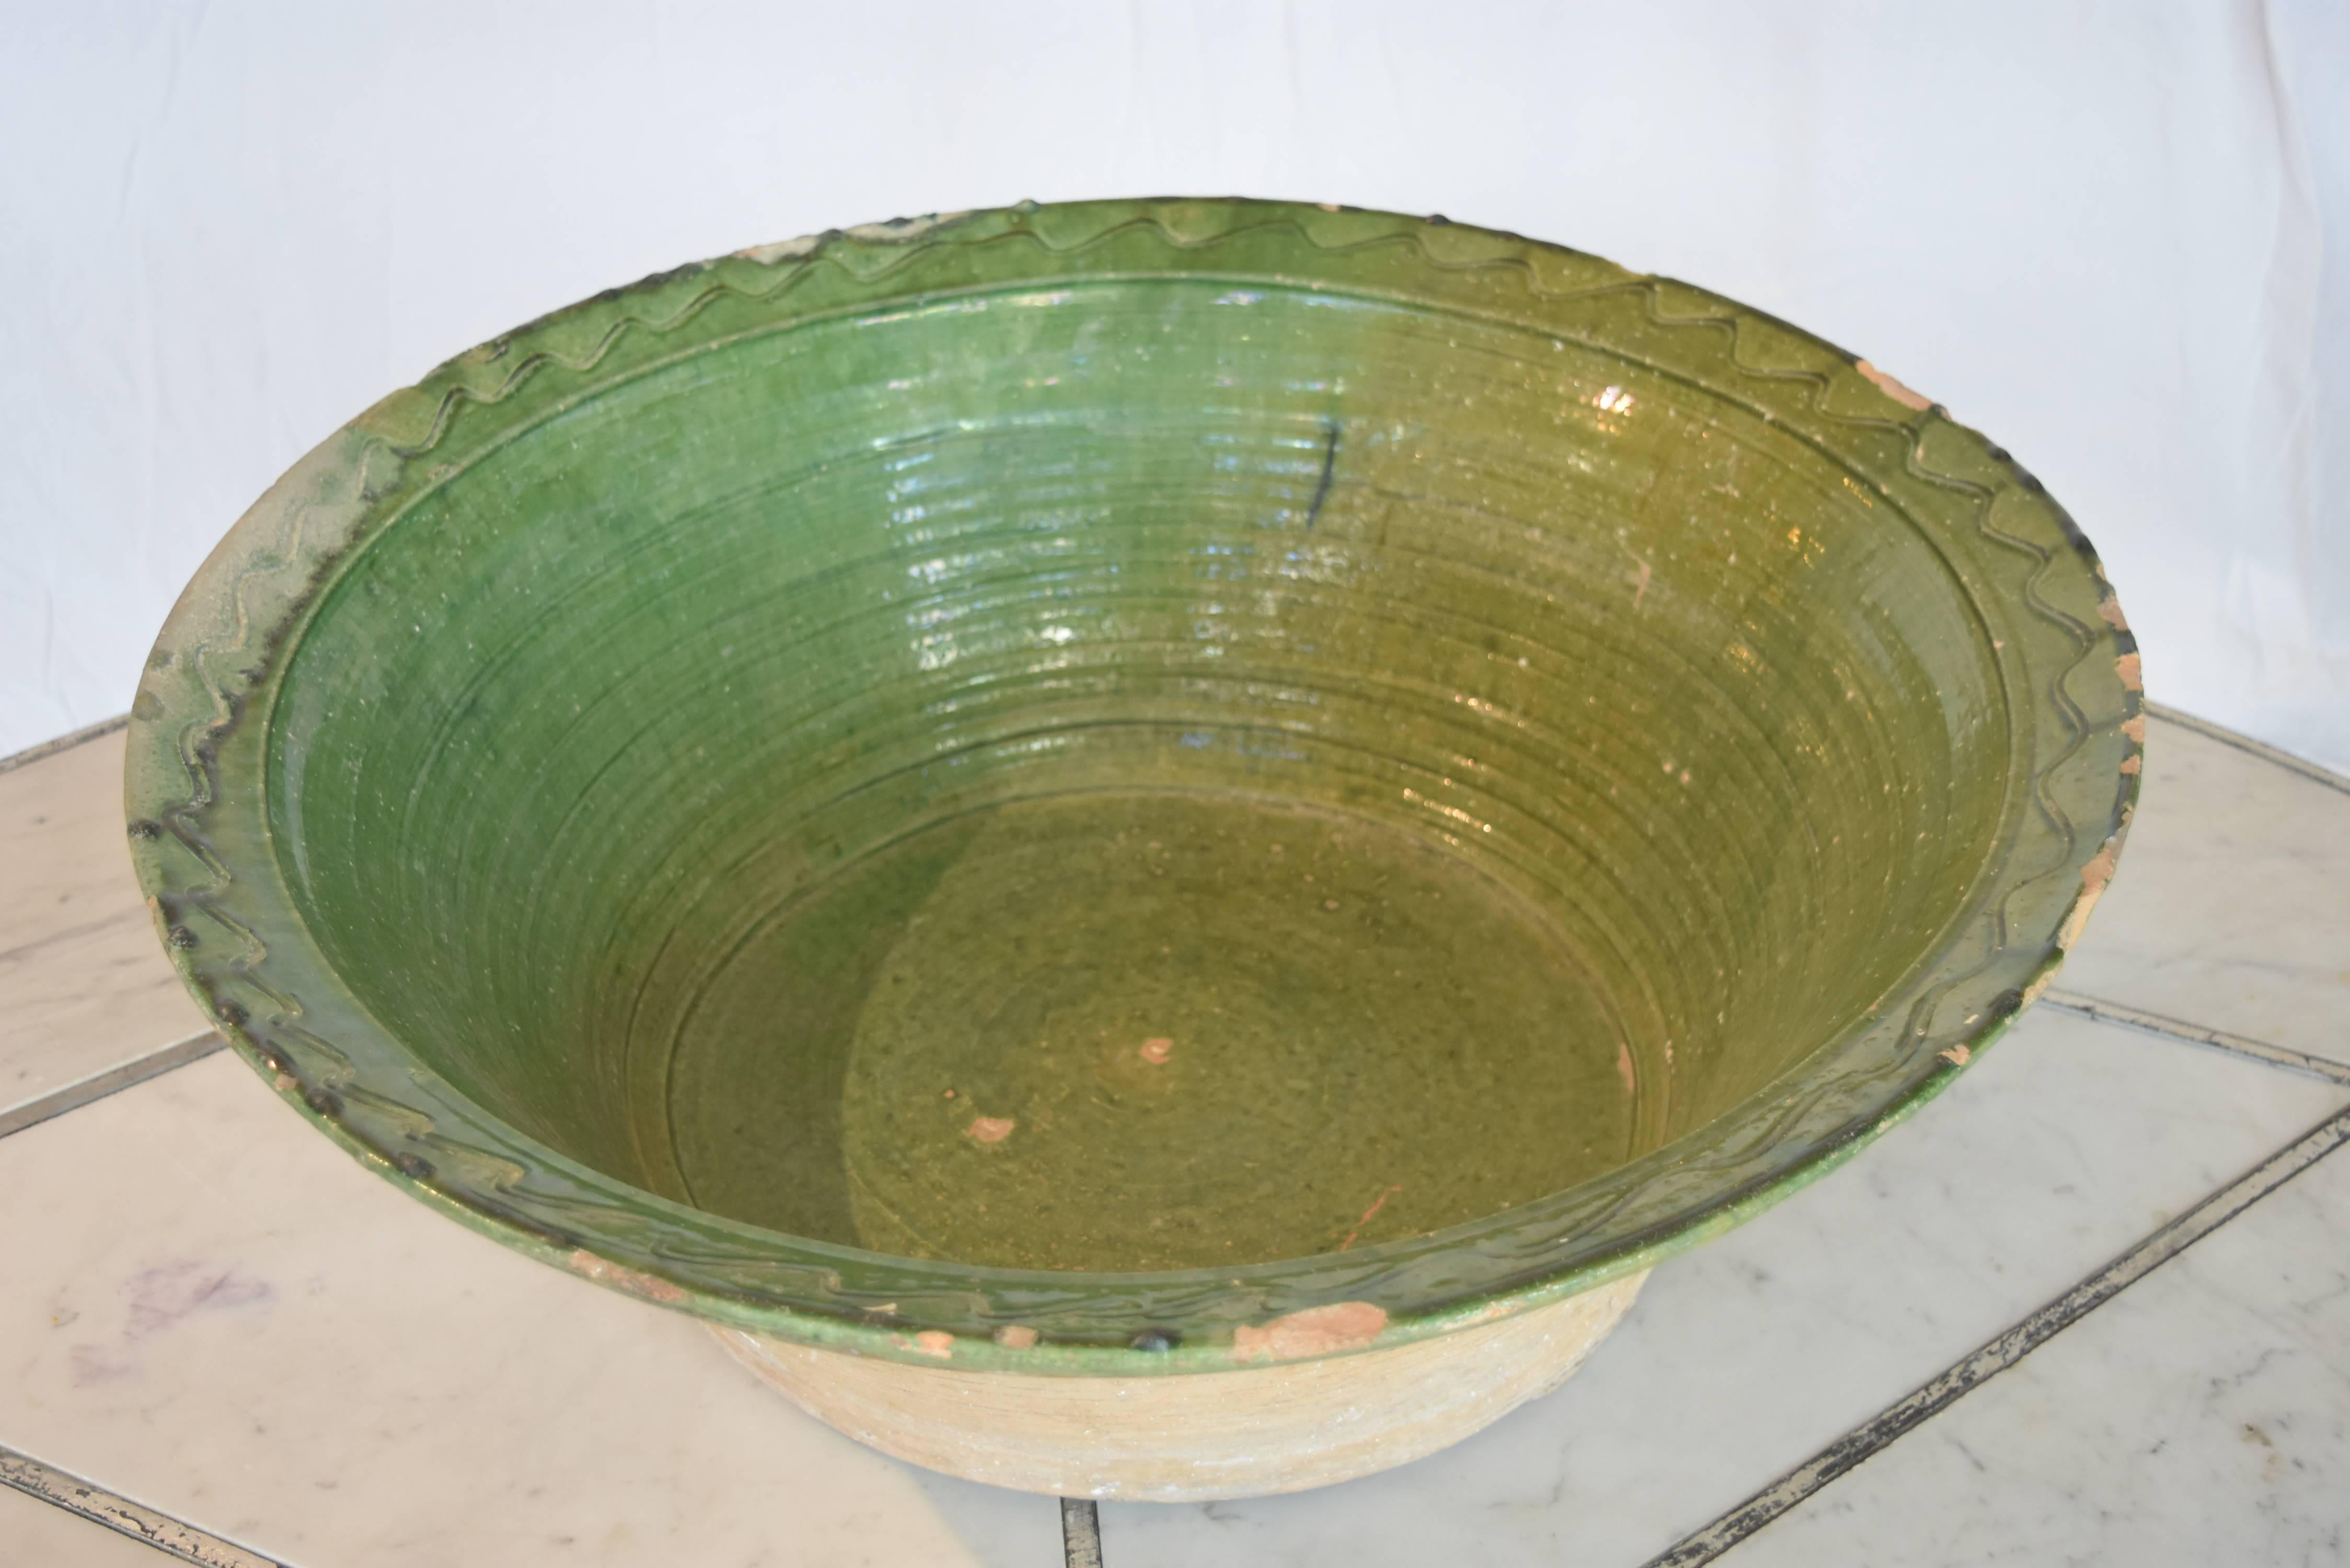 This Spanish bowl has a beautiful green color and in very good condition. These are used to hold fruits, veggies or anything for the kitchen. 